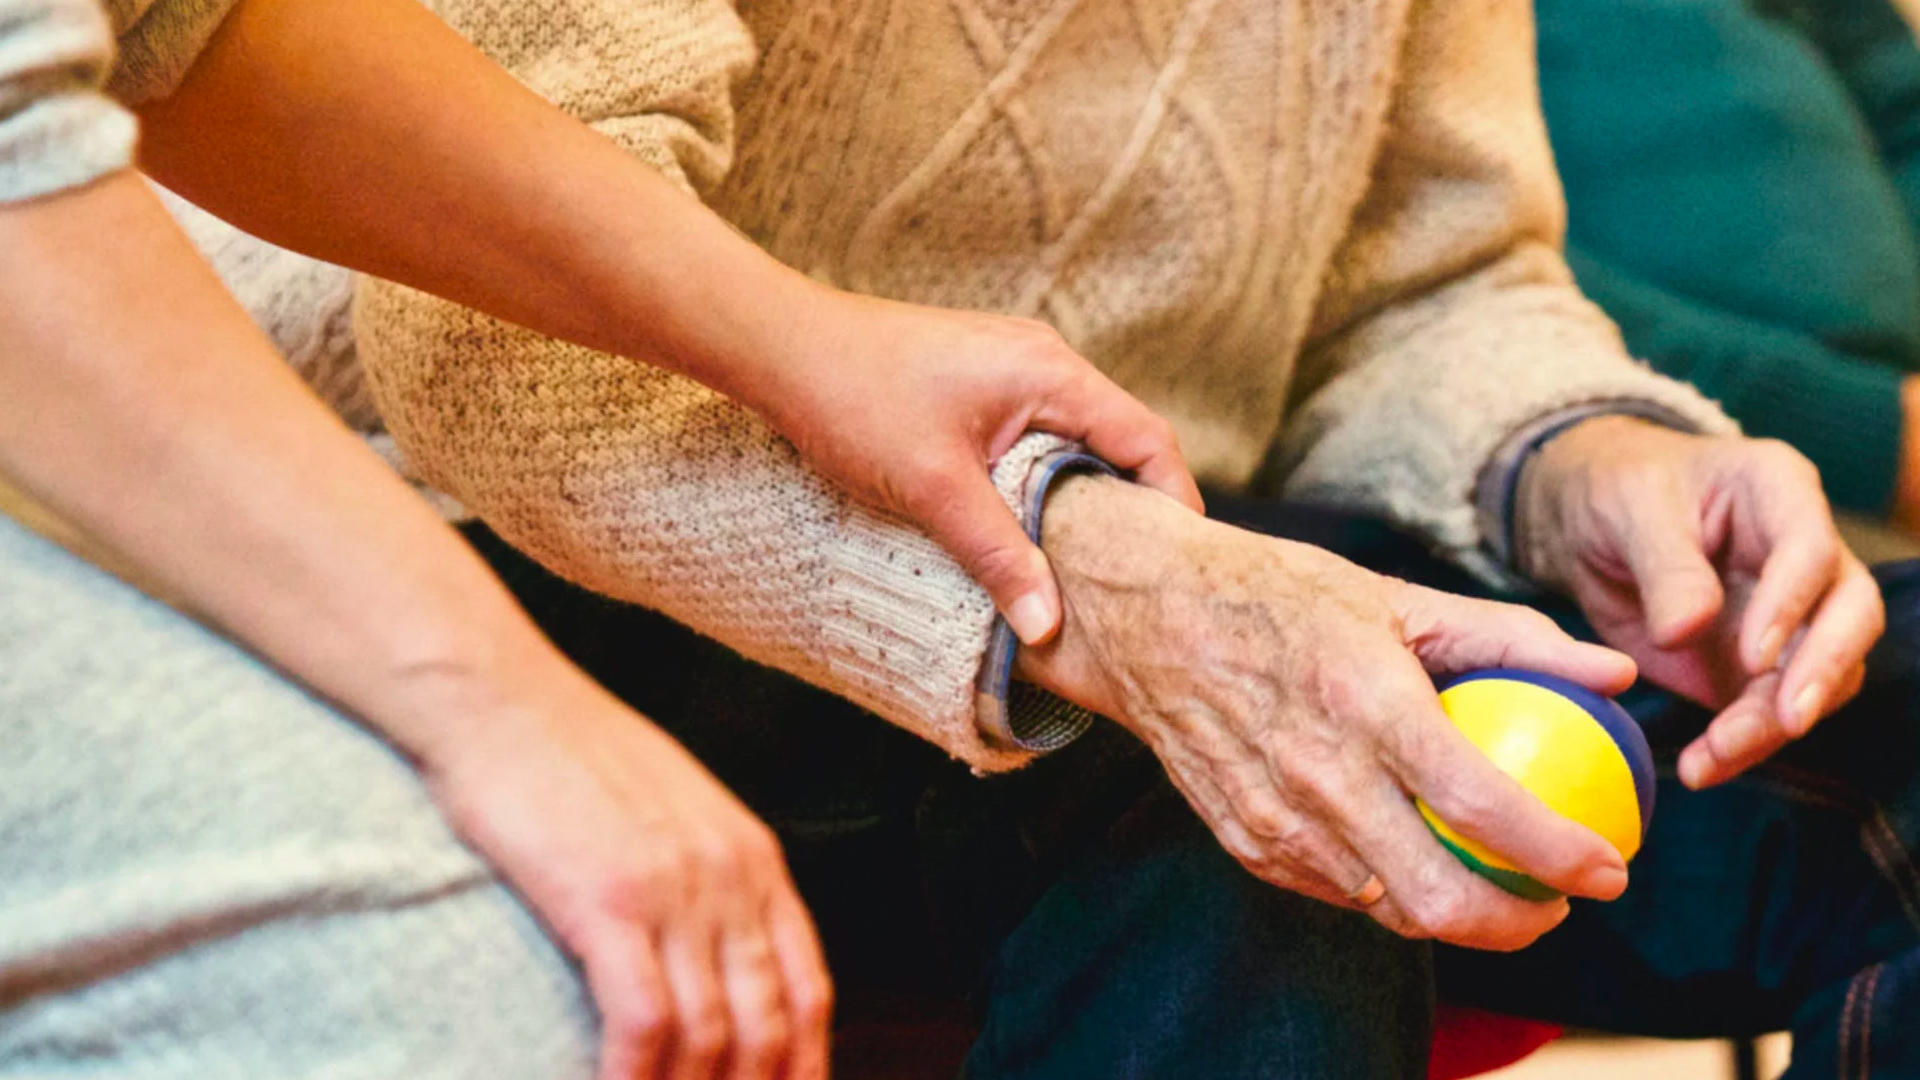 328 reports of domestic violence on elderly between 2019 and 2020